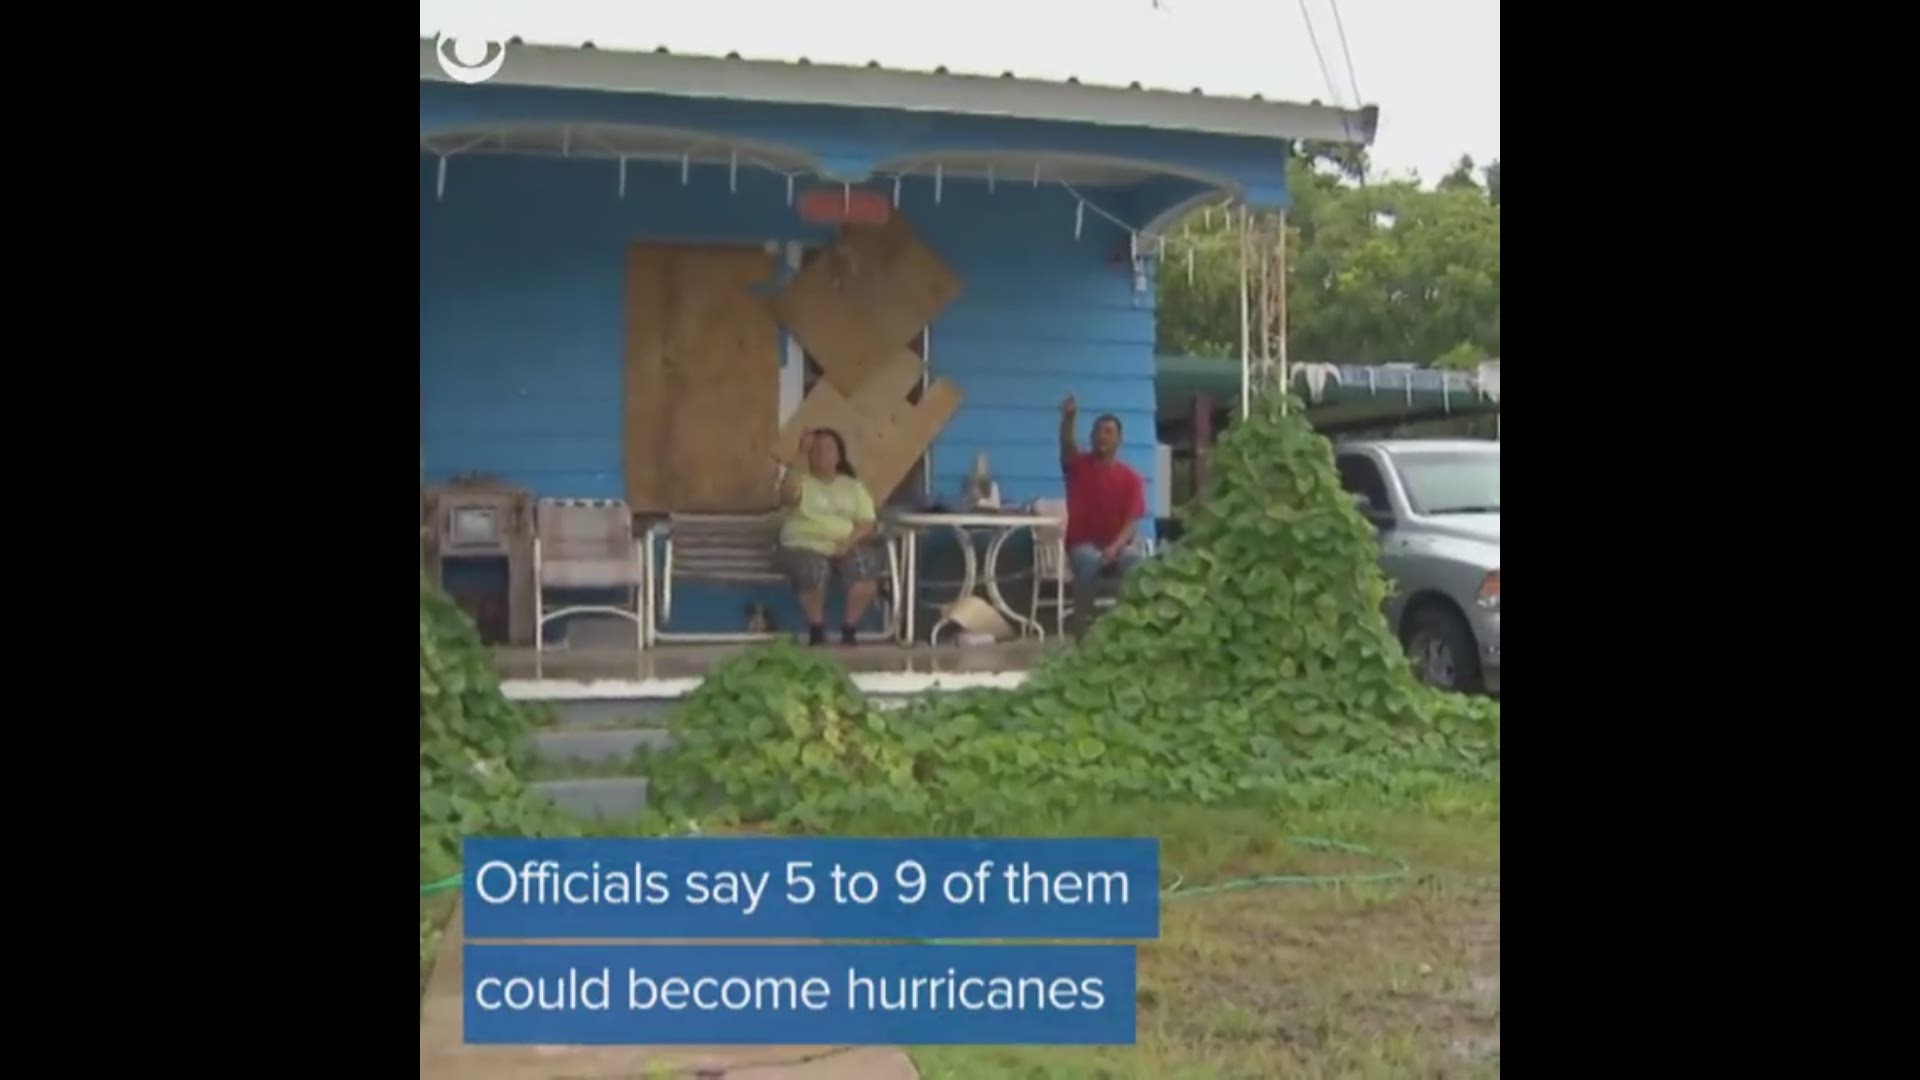 NOAA forecasters predict 10-16 named tropical systems this upcoming hurricane season. Forecasters say five to nine could become hurricanes, with winds of 74 mph or greater.